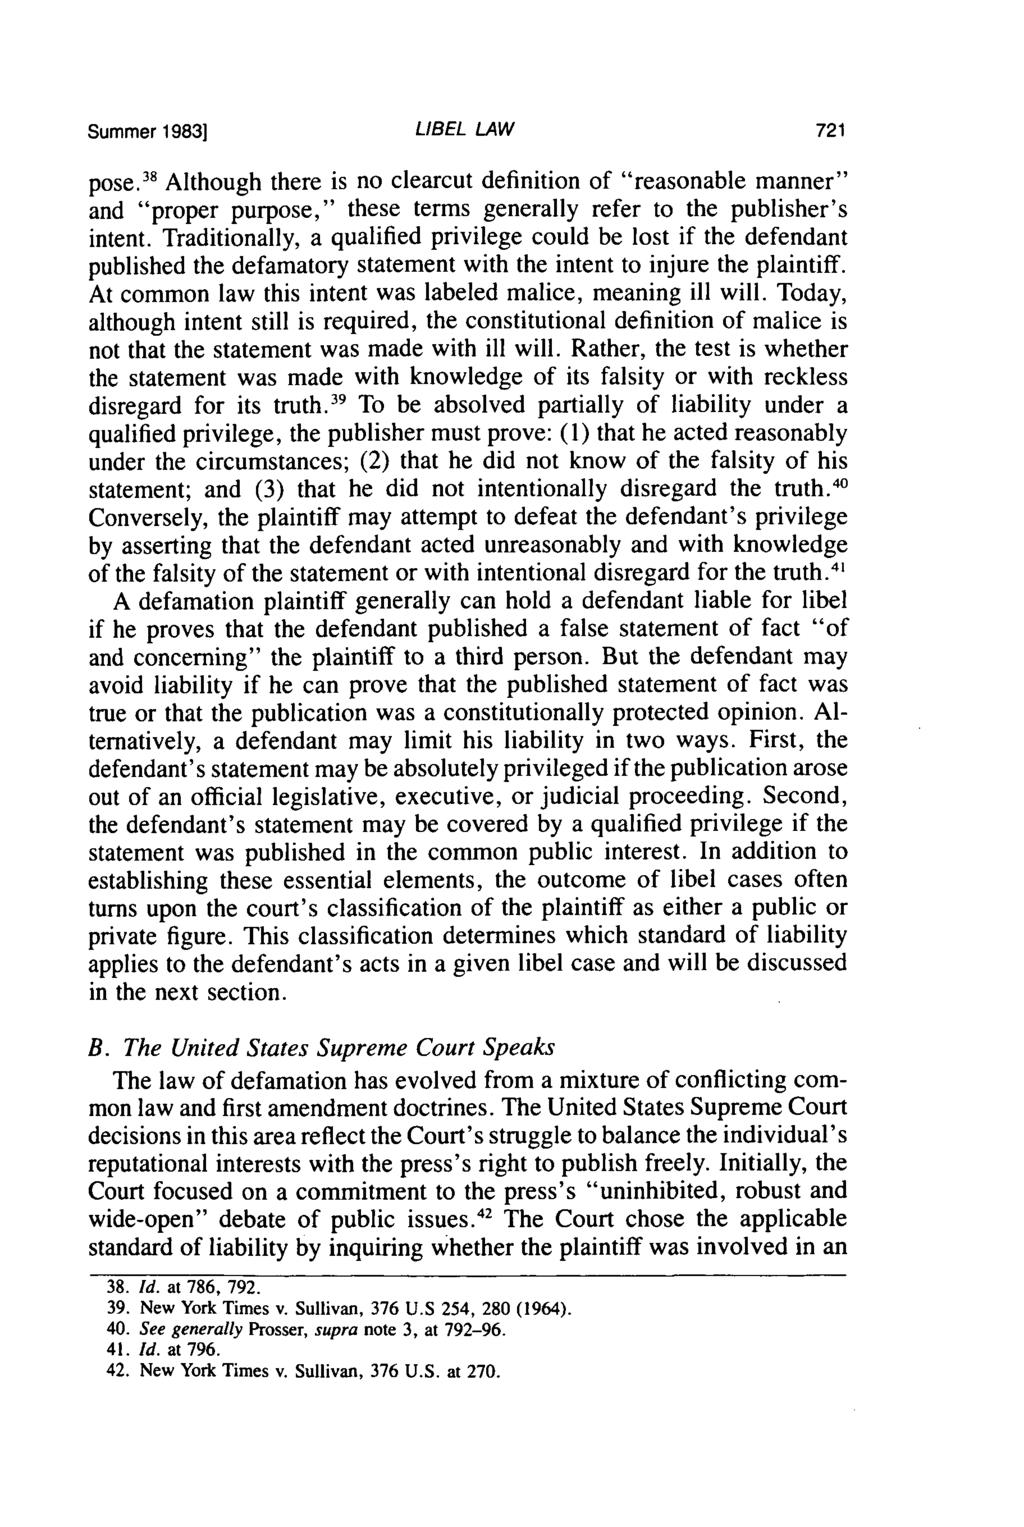 Summer 1983] LIBEL LAW pose. 38 Although there is no clearcut definition of "reasonable manner" and "proper purpose," these terms generally refer to the publisher's intent.